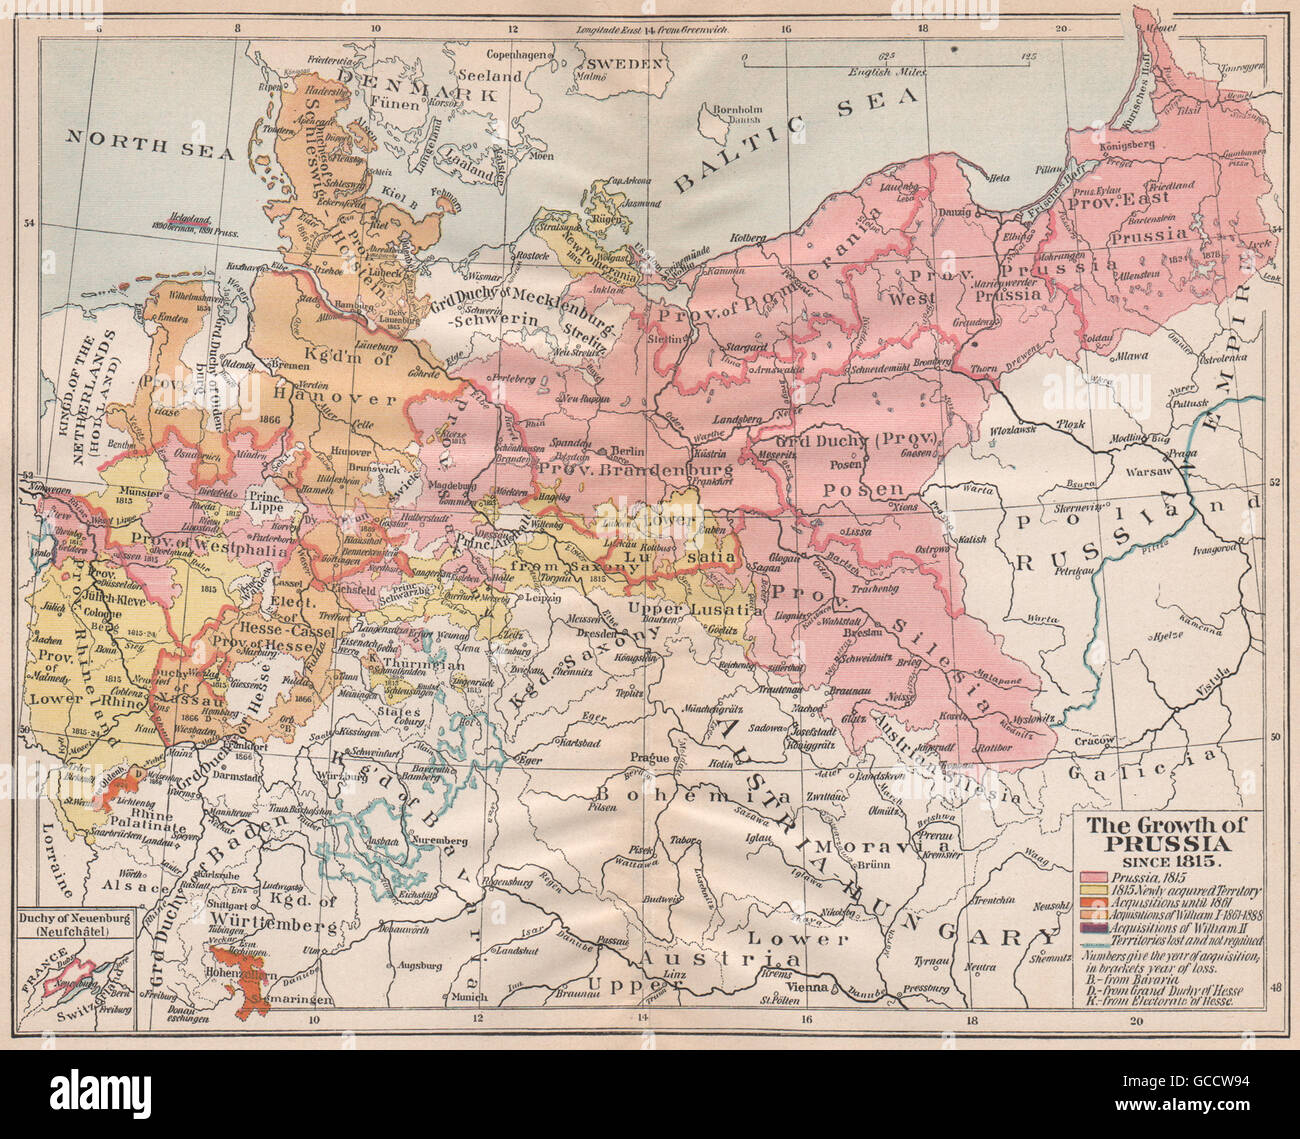 GROWTH OF PRUSSIA FROM 1815. Acquisitions William I II. Losses, 1917 old map Stock Photo